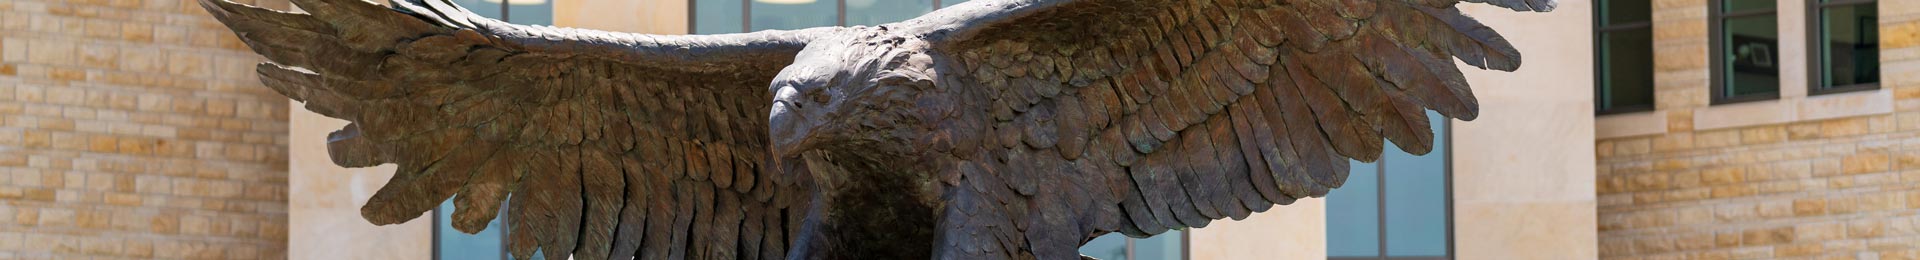 Photograph: Statue of eagle outside law school building.